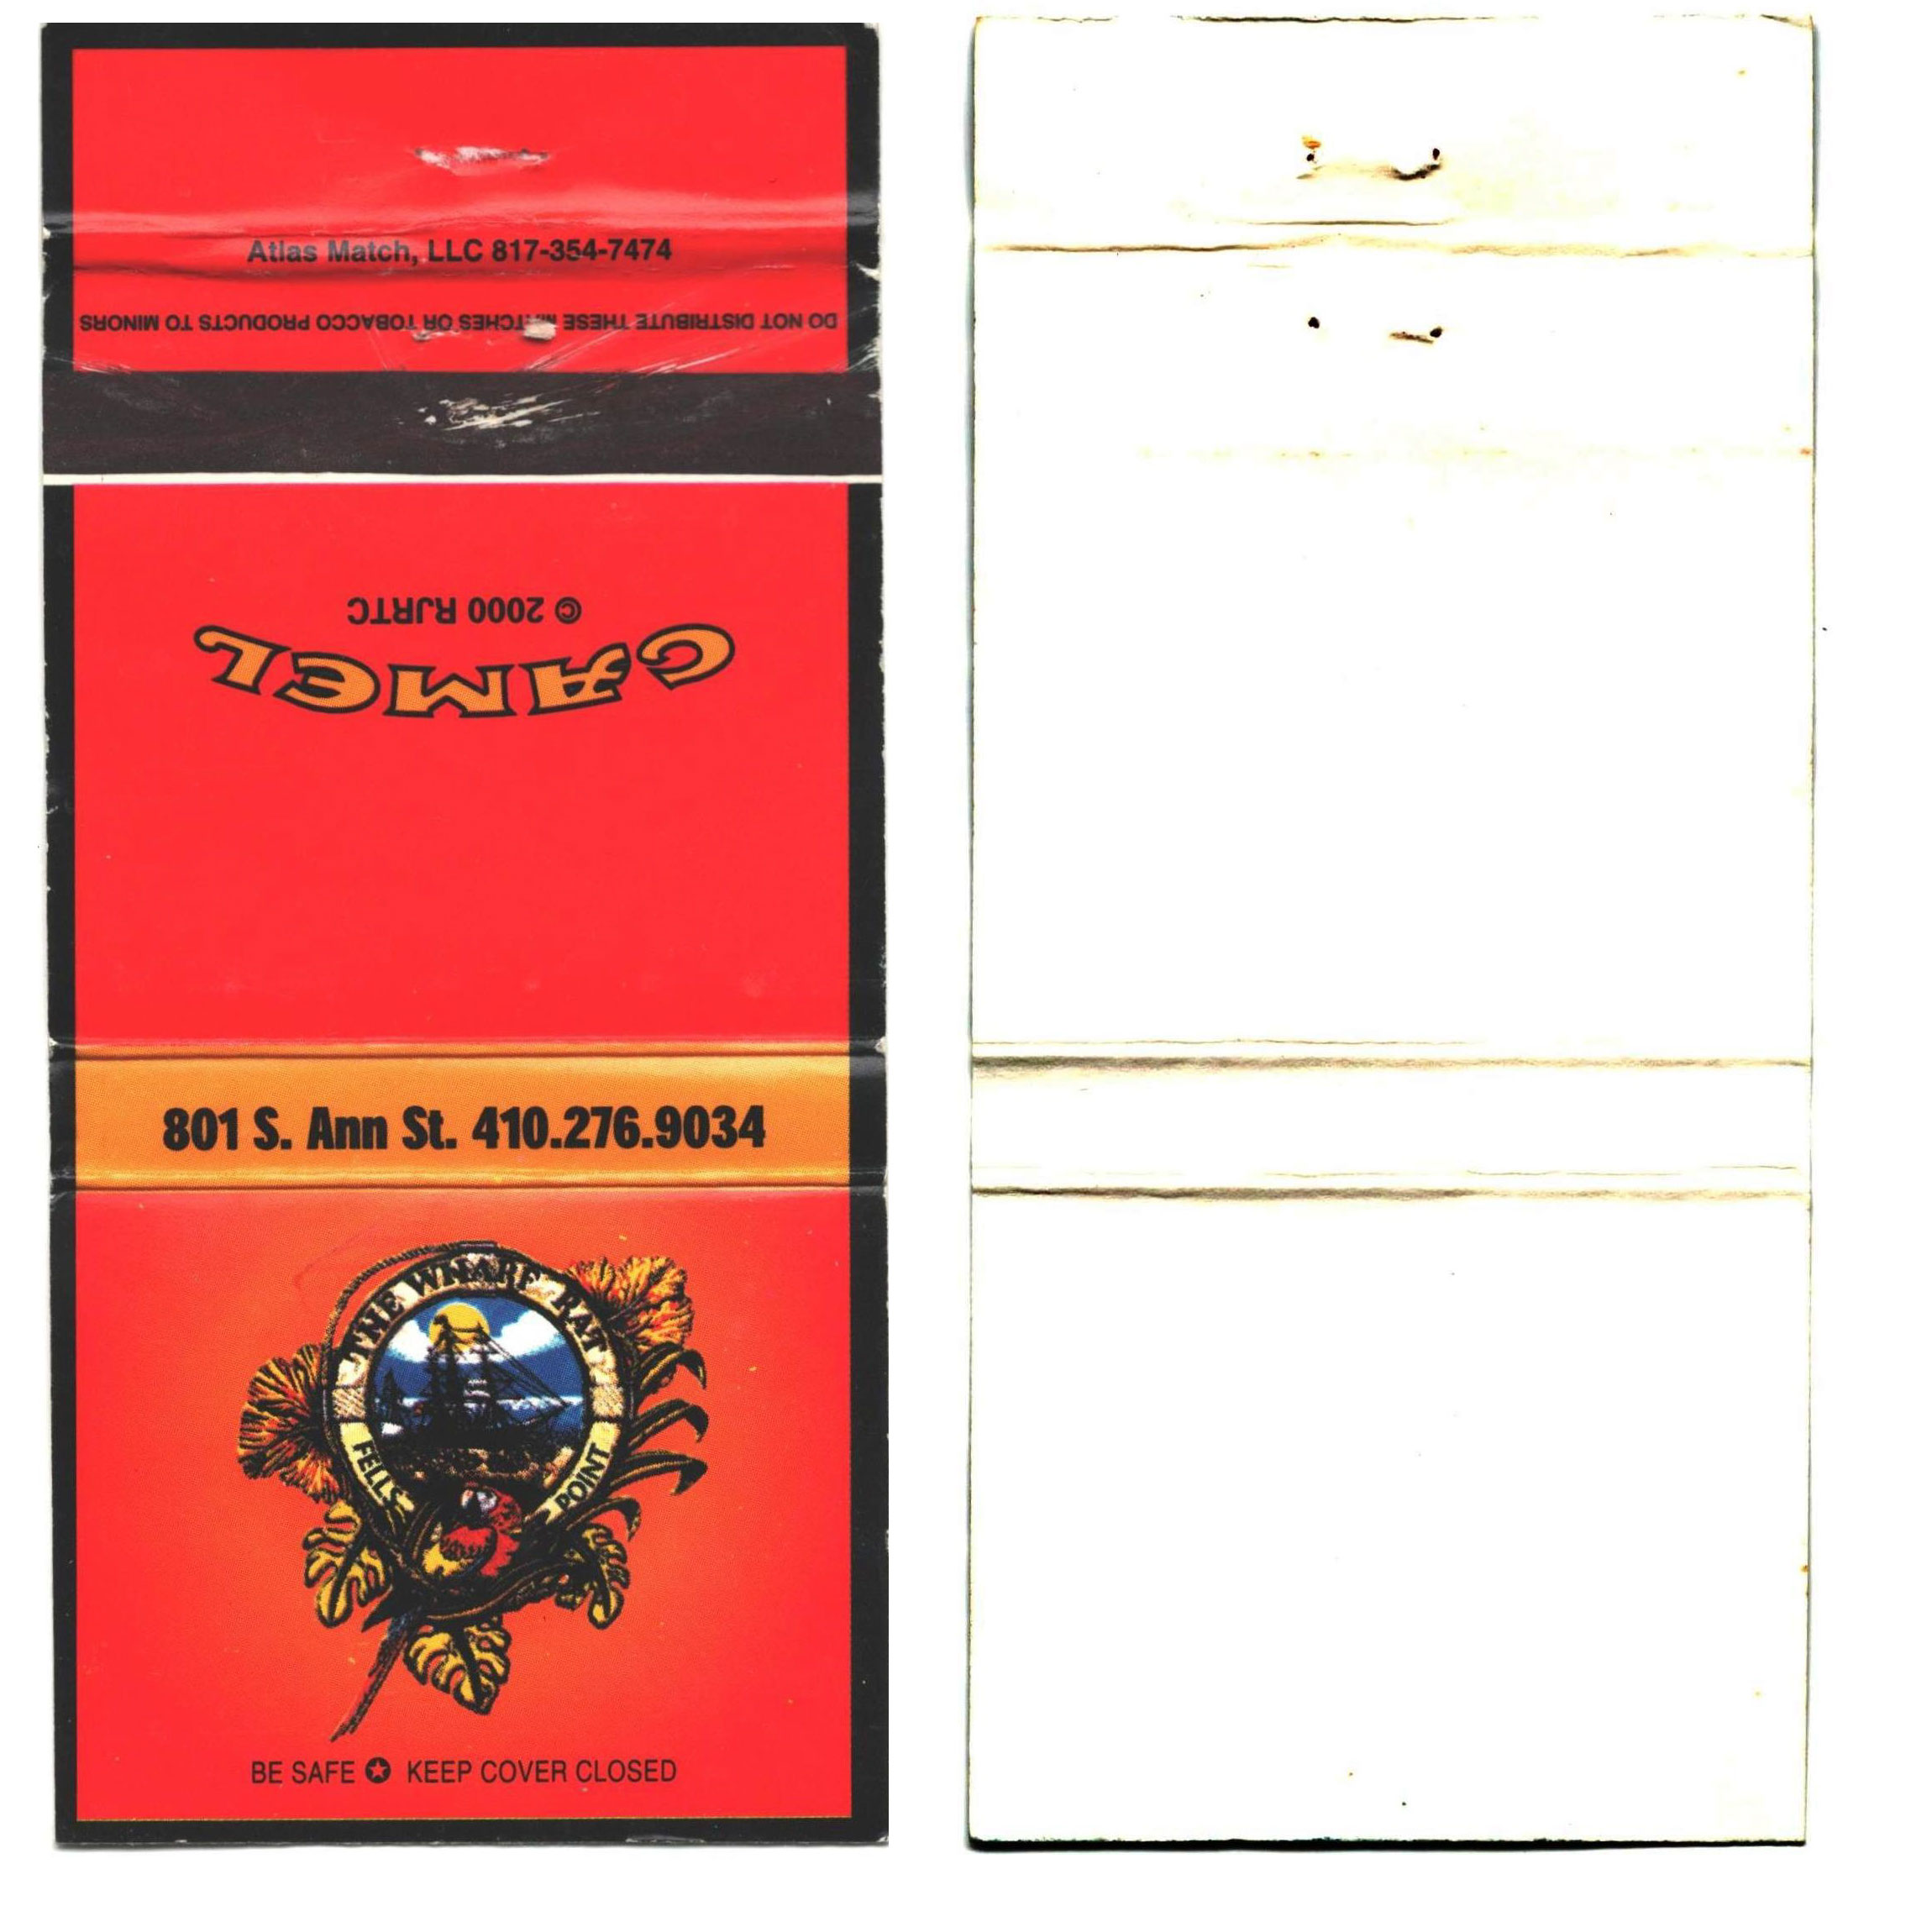 Matchbook Cover - The Wharf Rat